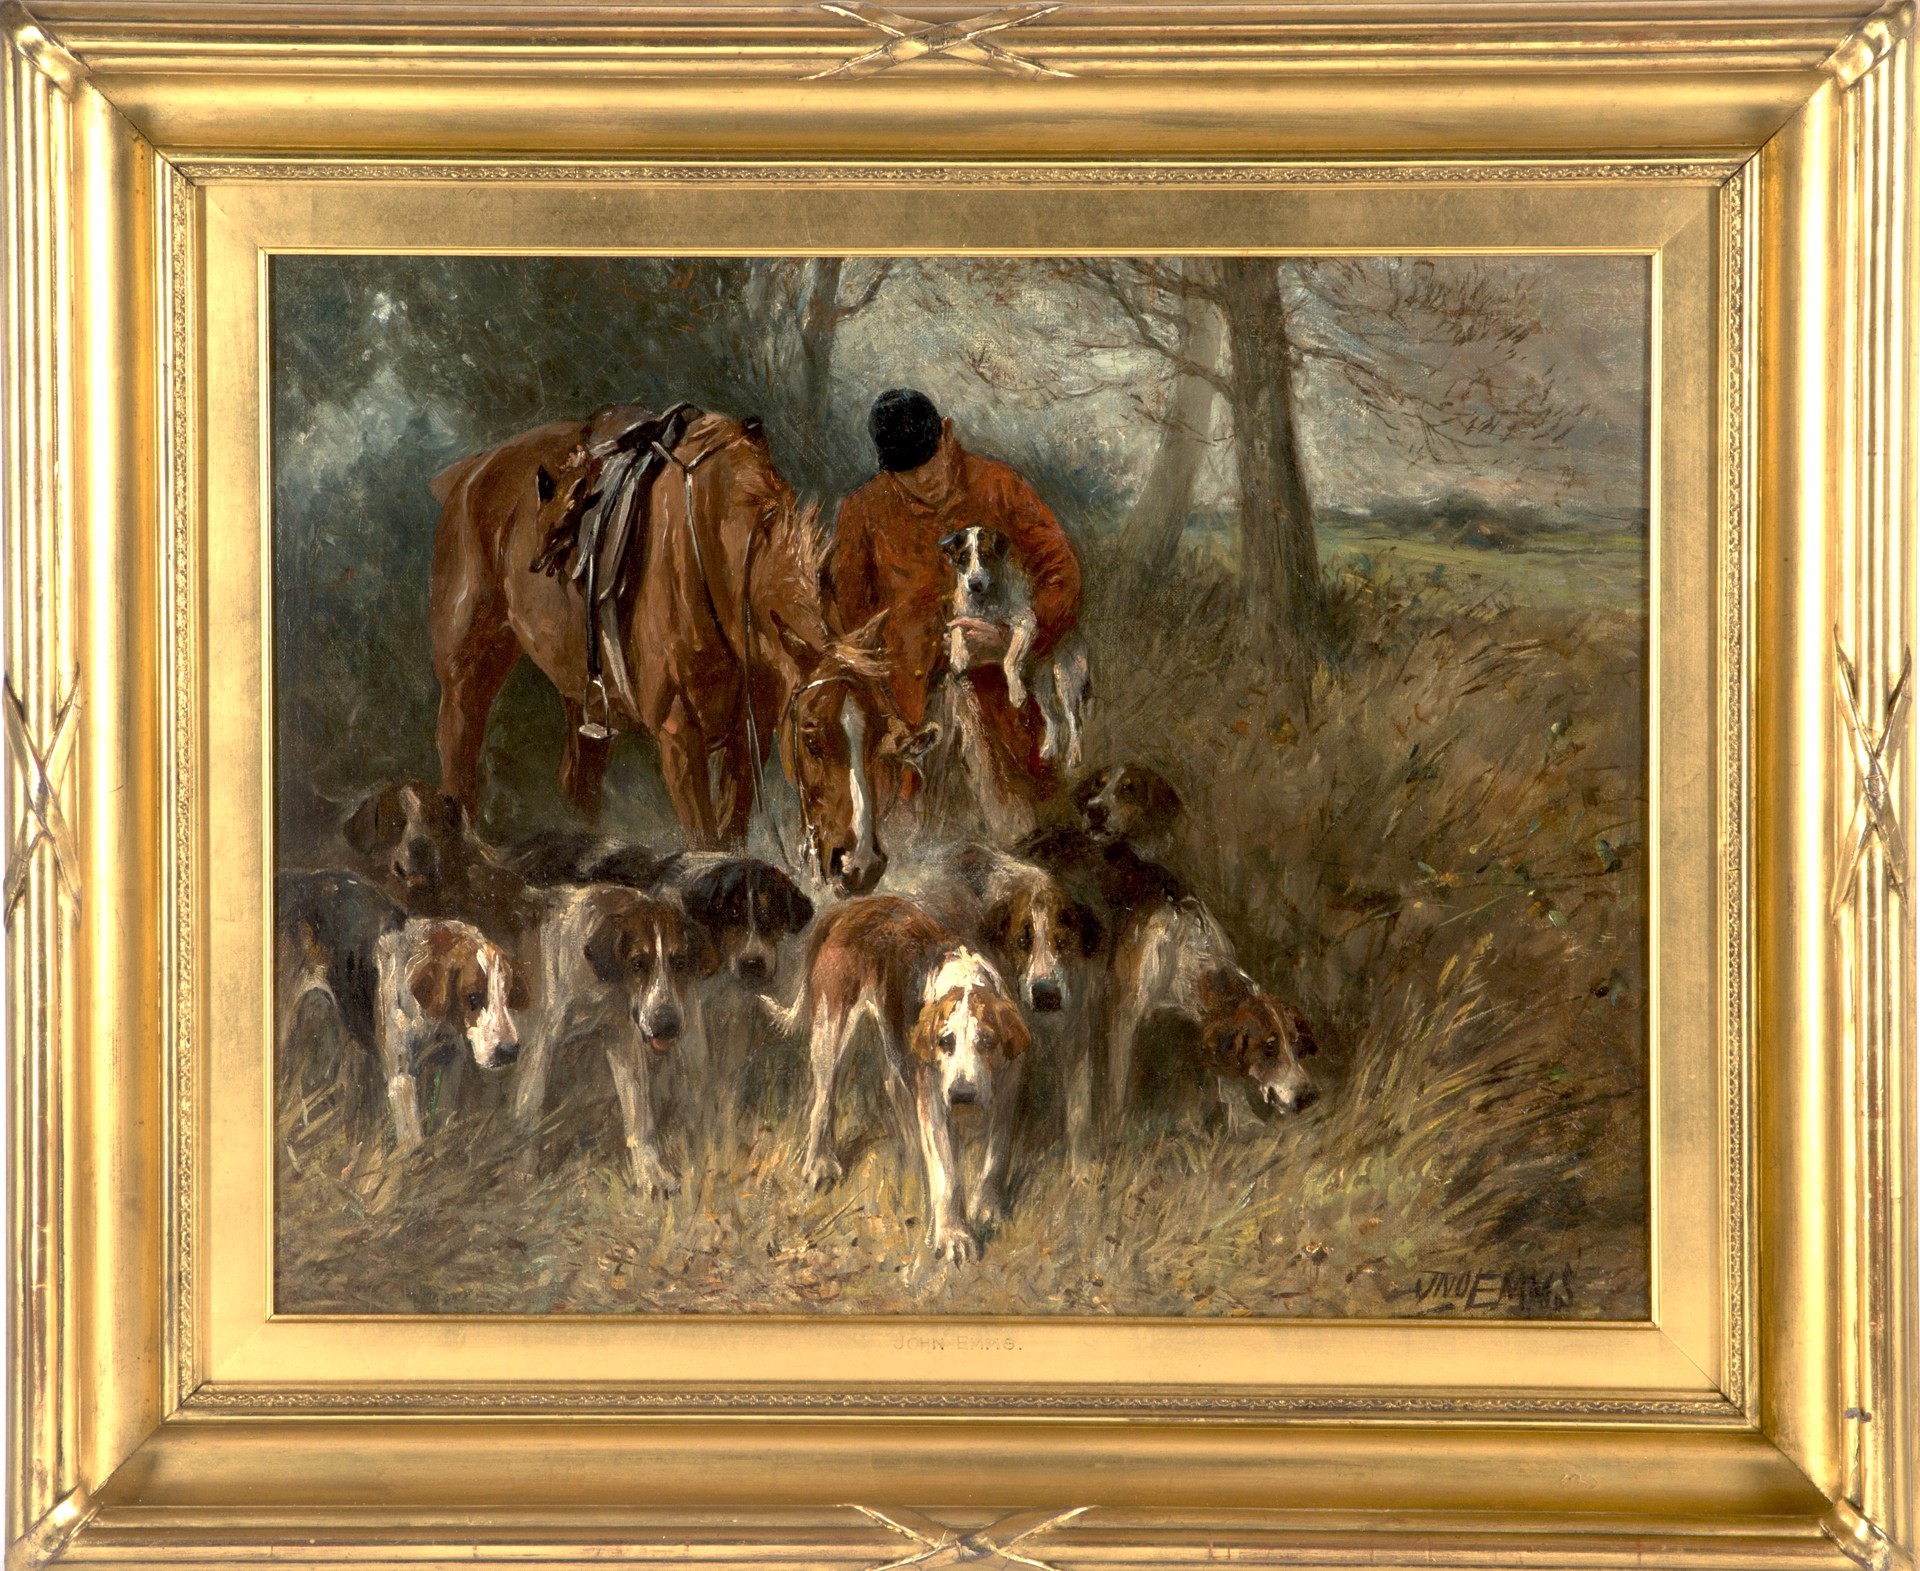 Huntsman with Terrier and Hounds by John Emms